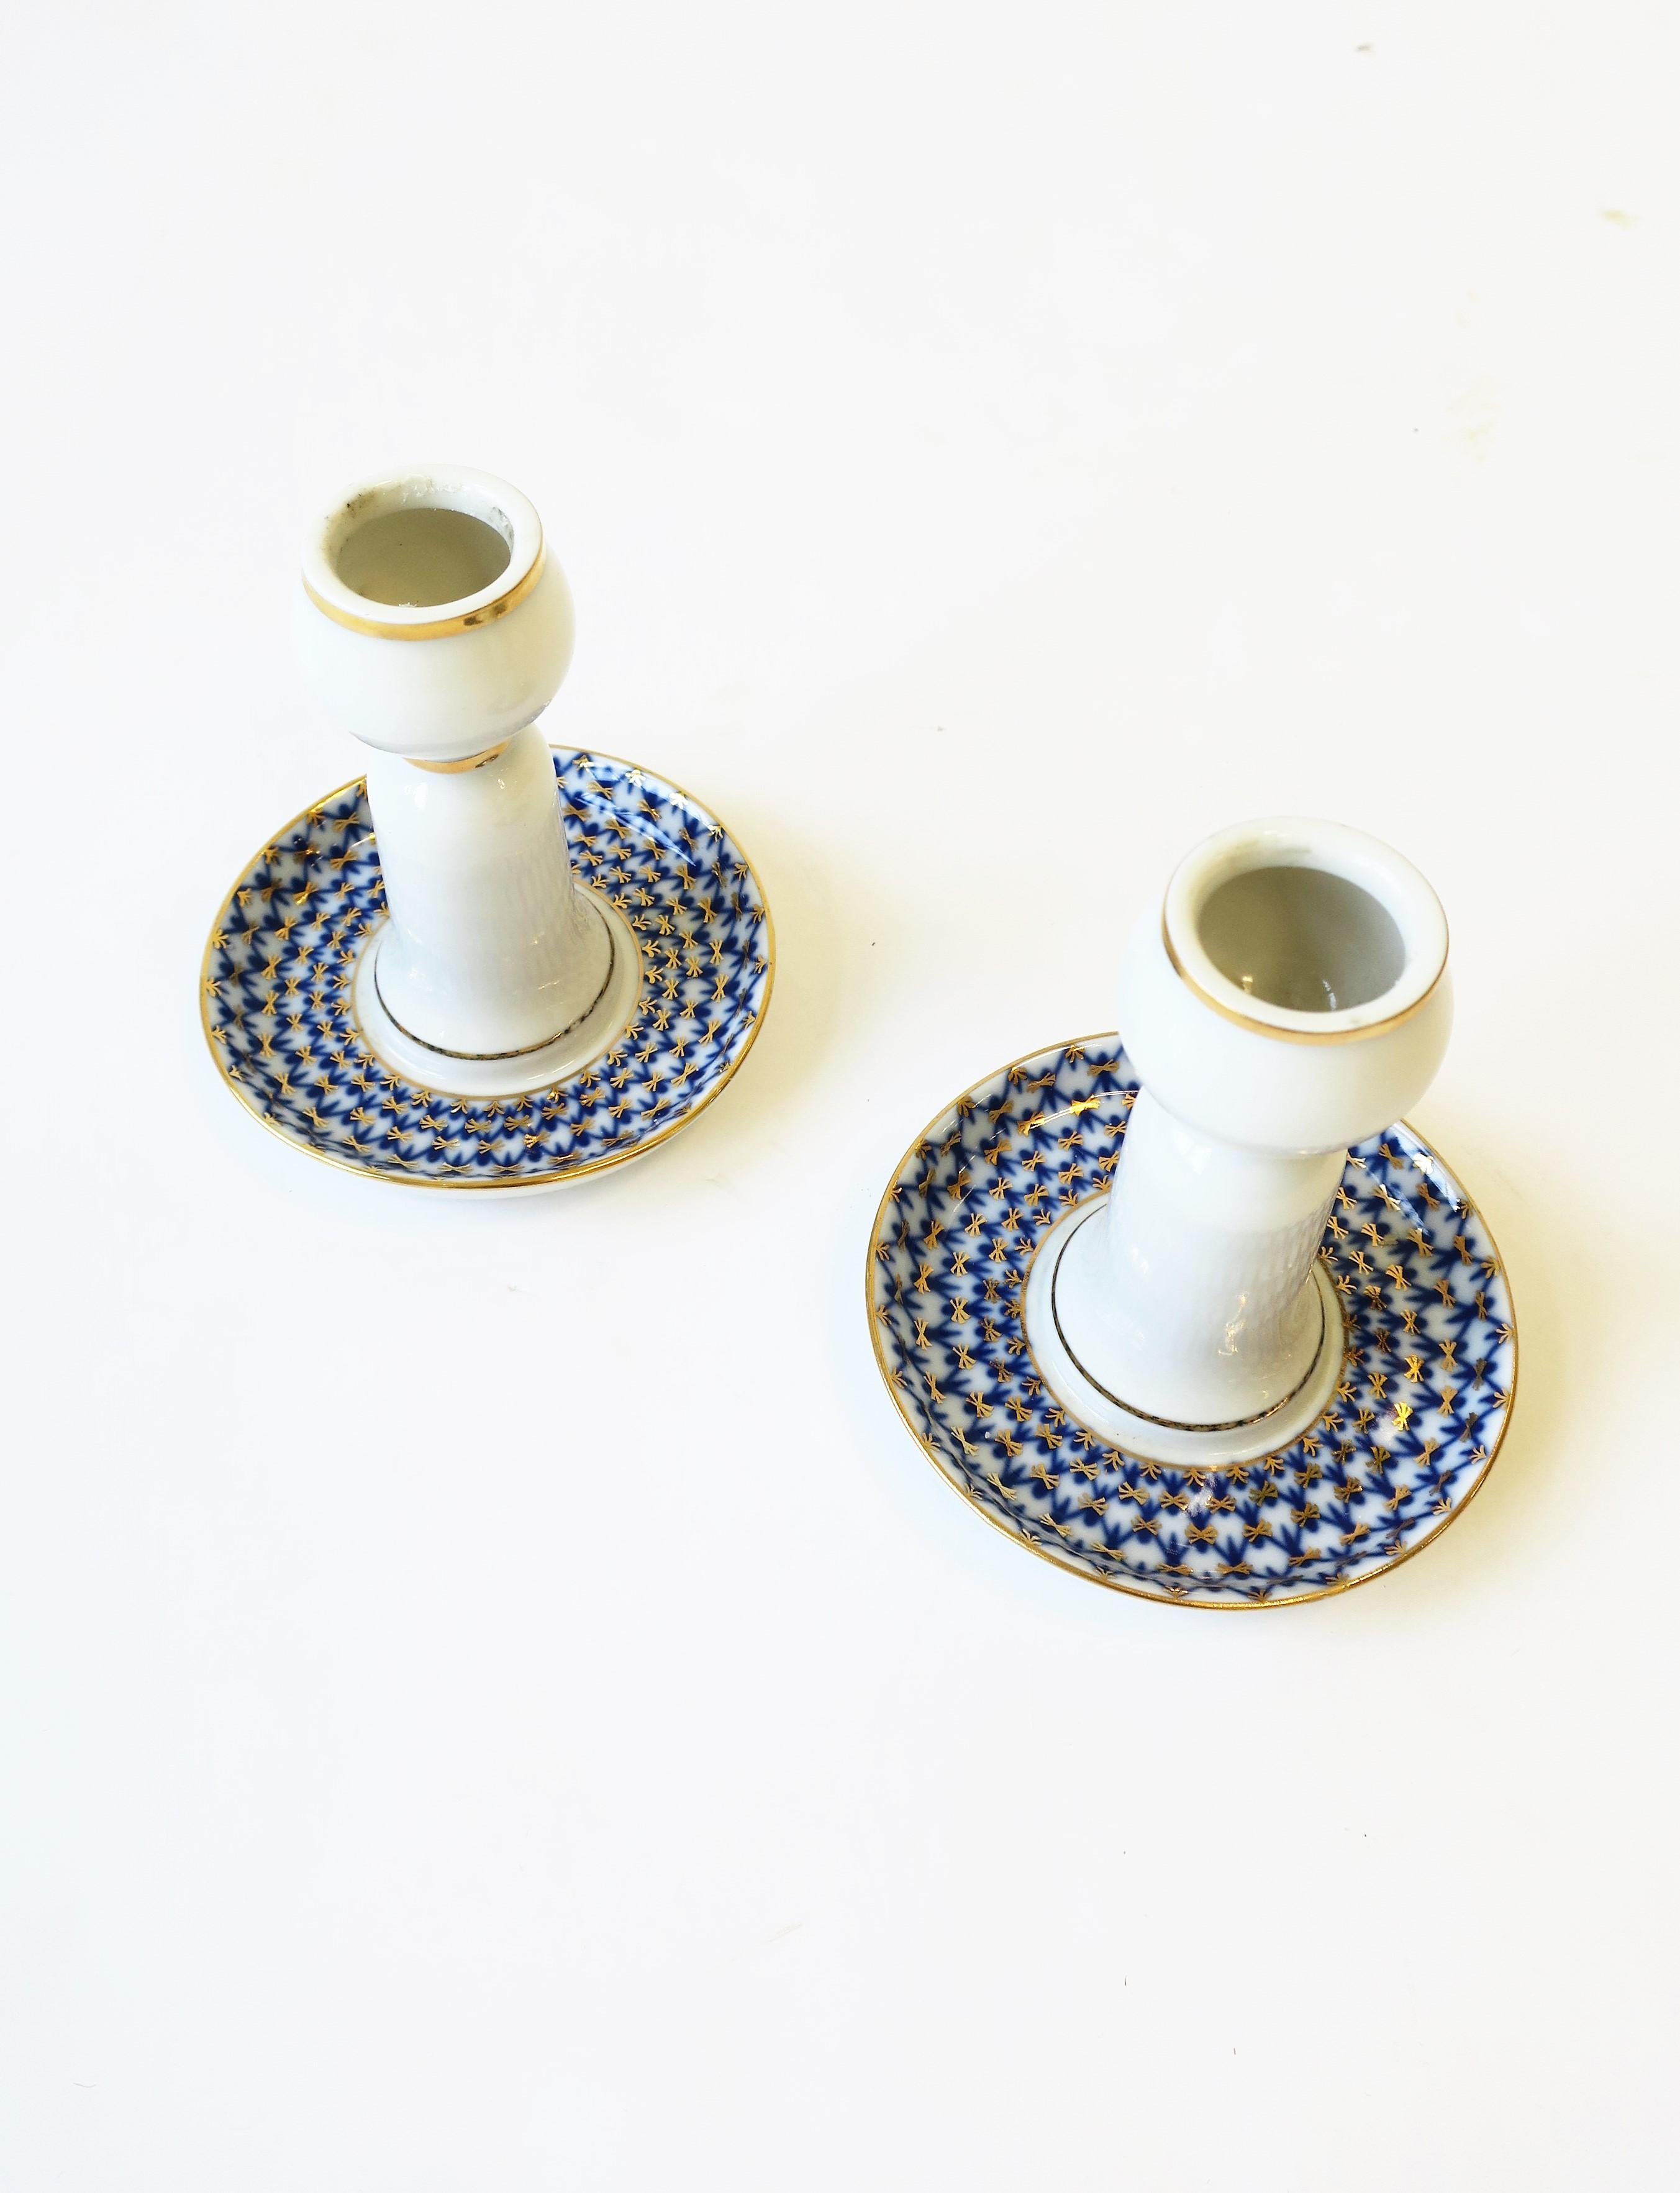 A pair of authentic Russian blue, gold and white porcelain candlestick holders in the 'Cobalt Net' pattern by Lomonosov Porcelain, Russia, circa late-20th century, after 1991. With maker's mark and marked 